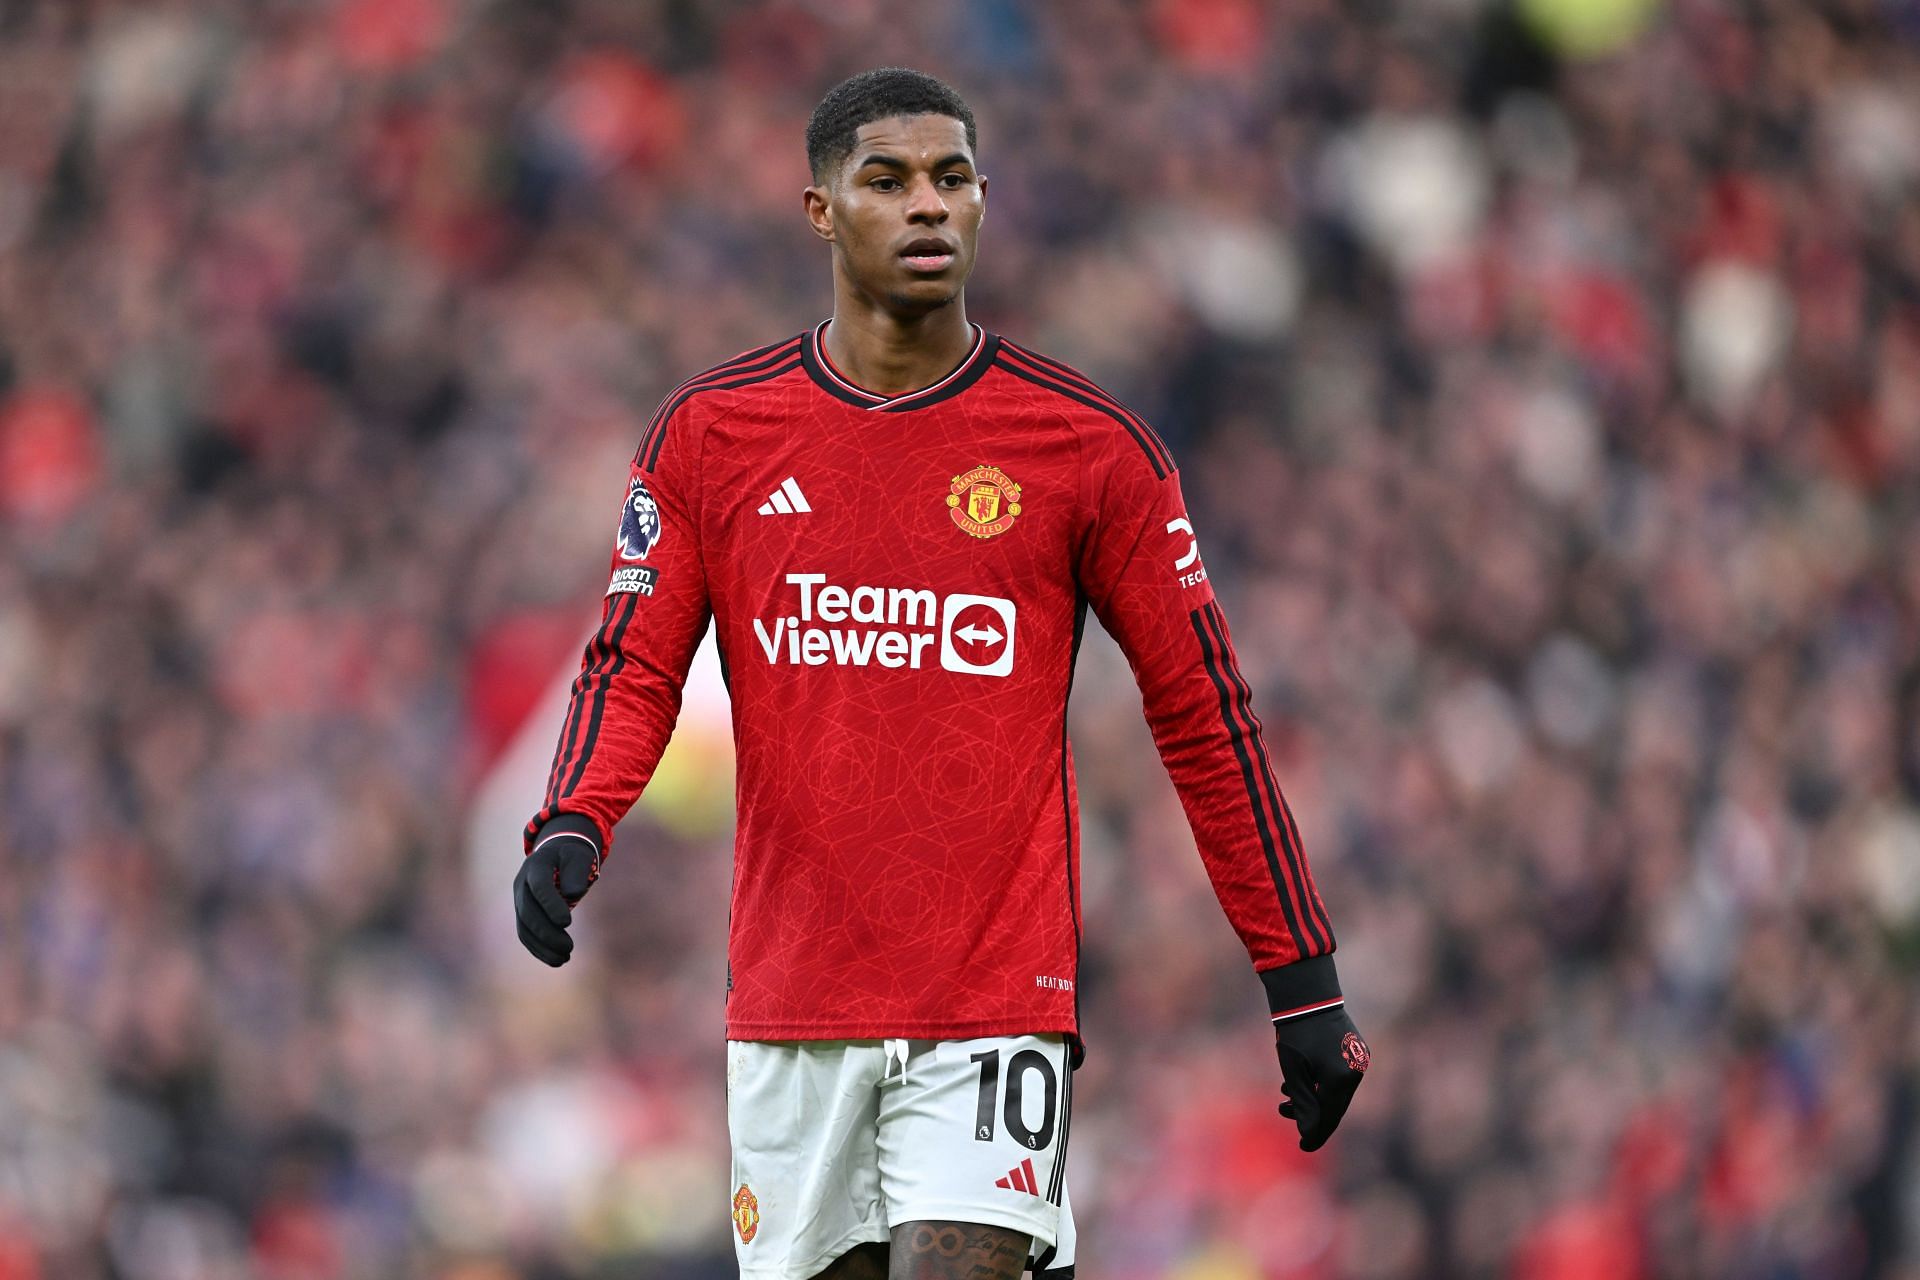 Marcus Rashford has struggled for form this campaign